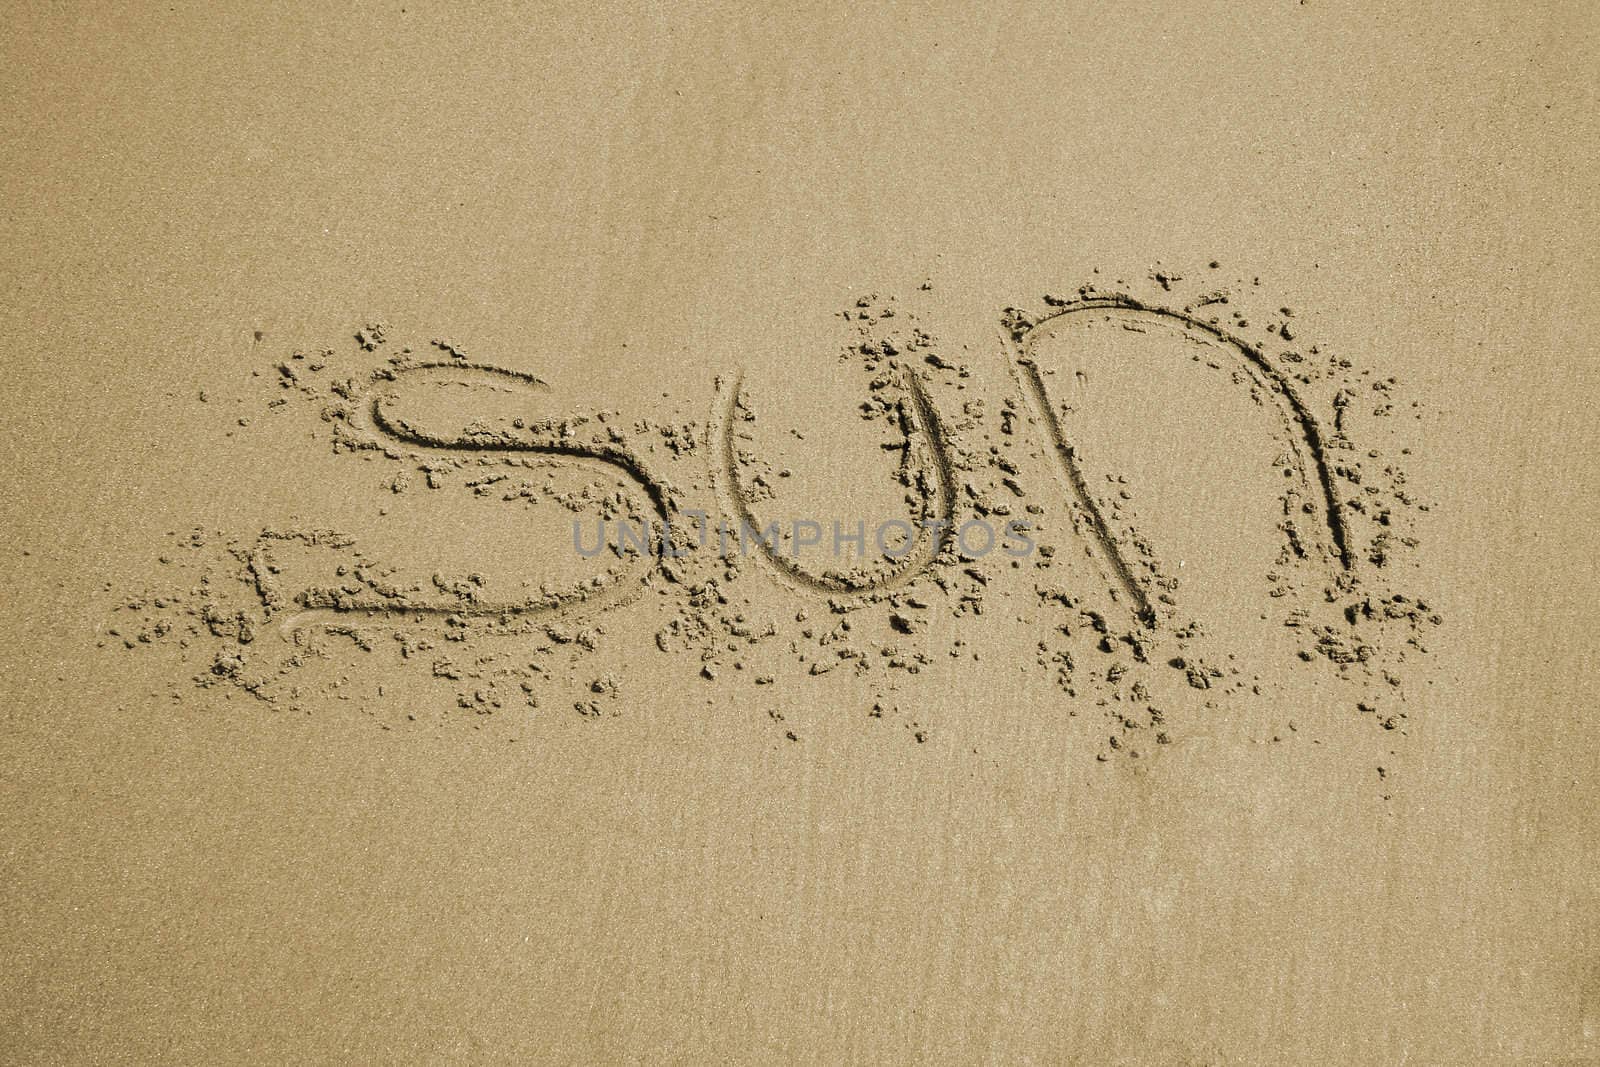 sun in sand by Brightdawn